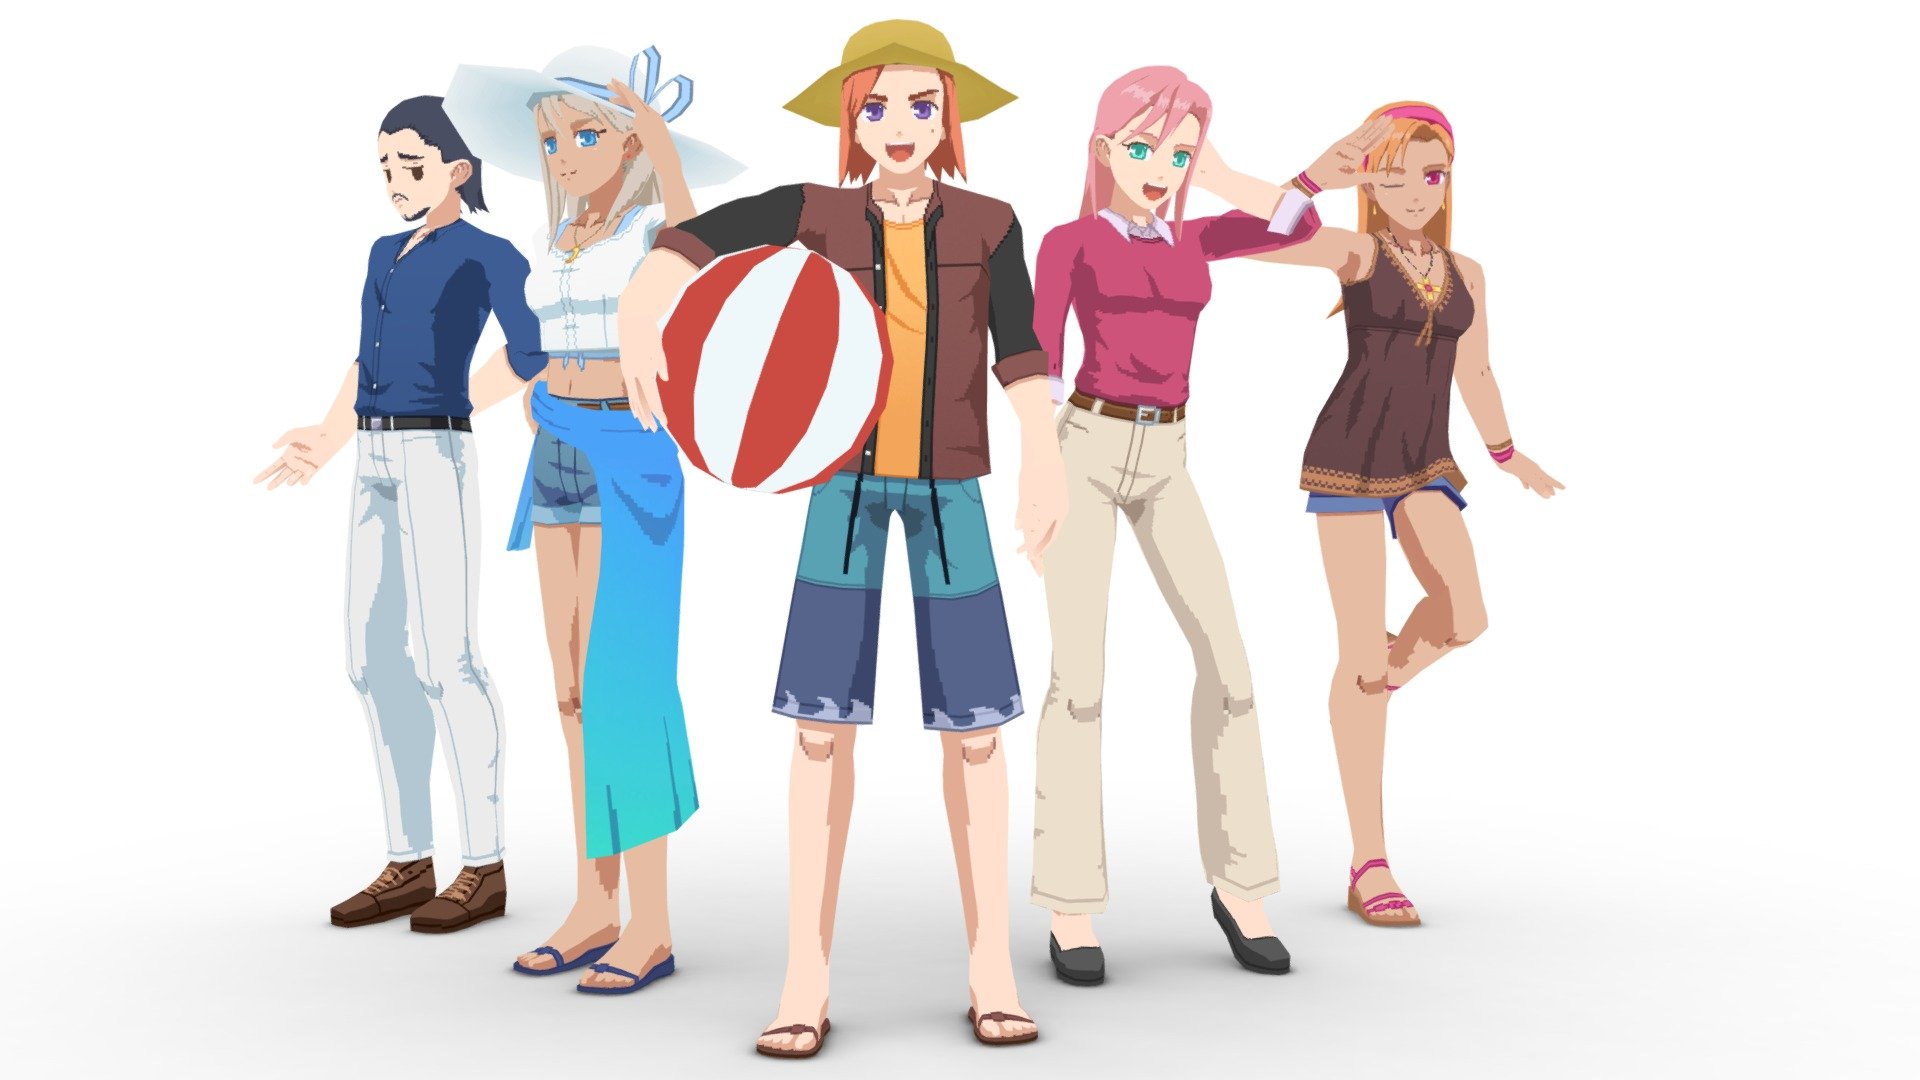 Pack of low-poly 3D character designs with anime-style and pixel art texture created in Blender version 3.4. You can also obtain the uasset (Unreal Engine) and FBX files by downloading the &ldquo;additional file